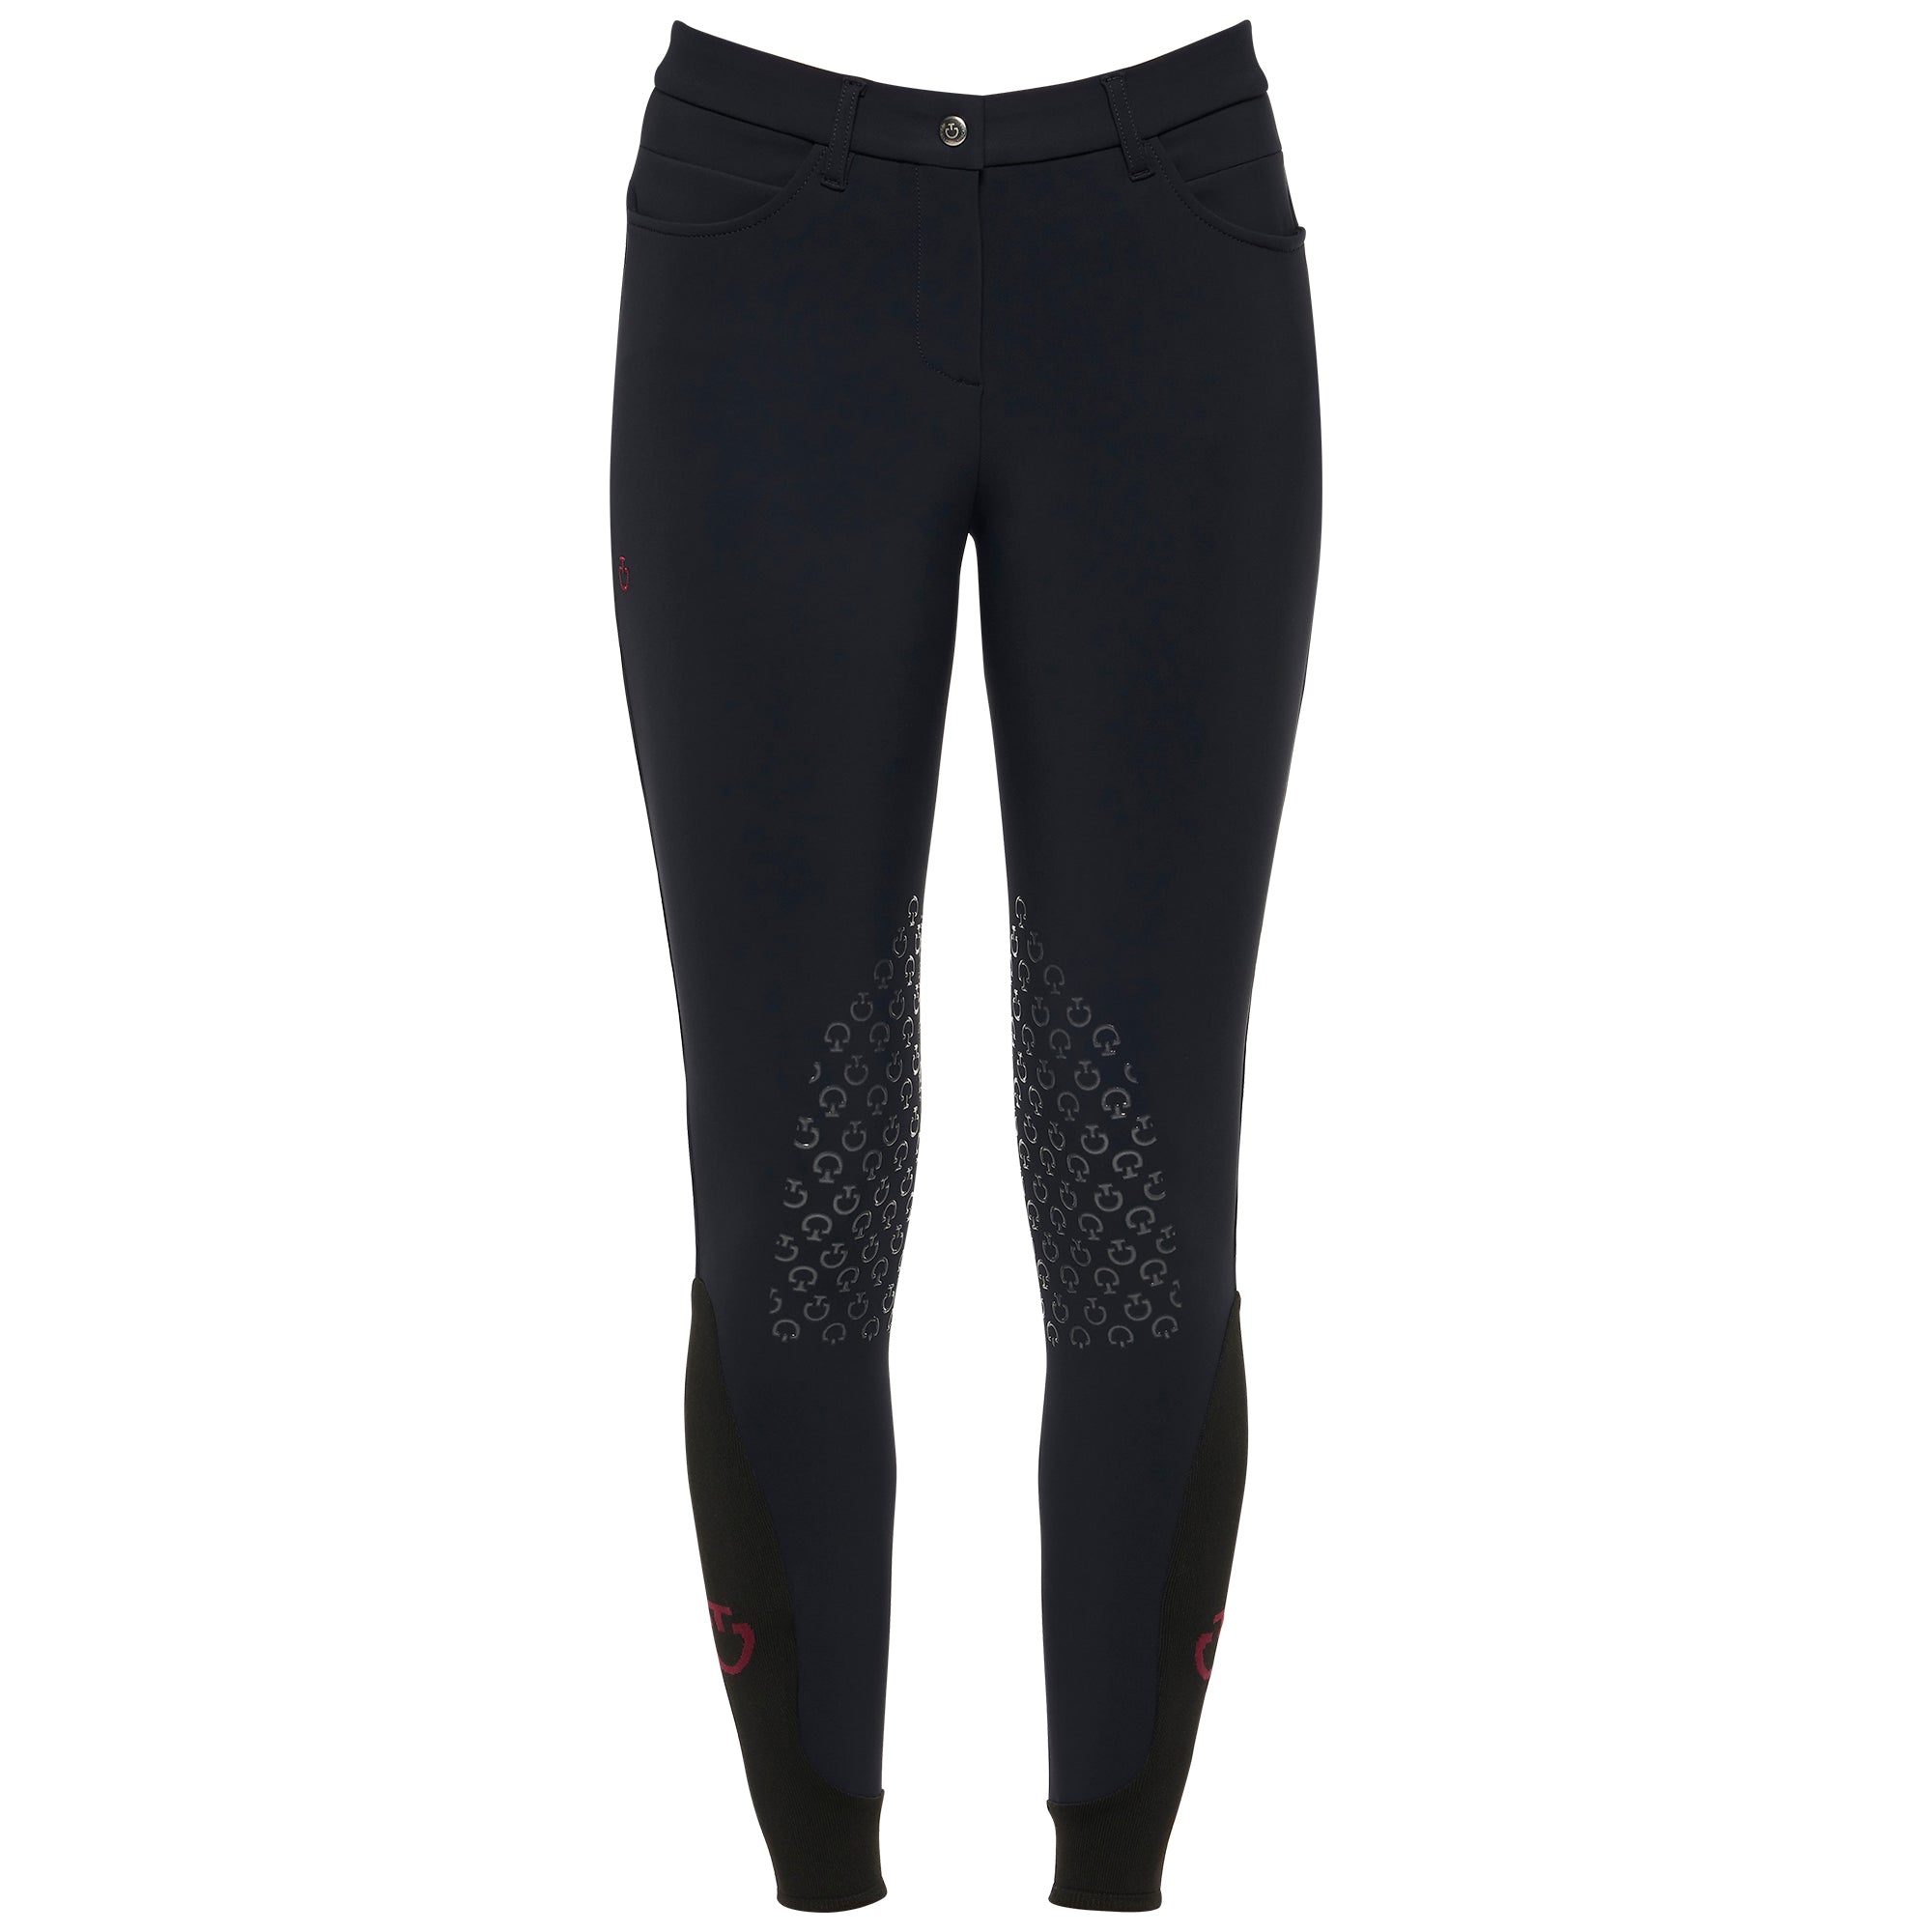 Cavalleria Toscana New Grip System Breeches - Grip Knee Patches